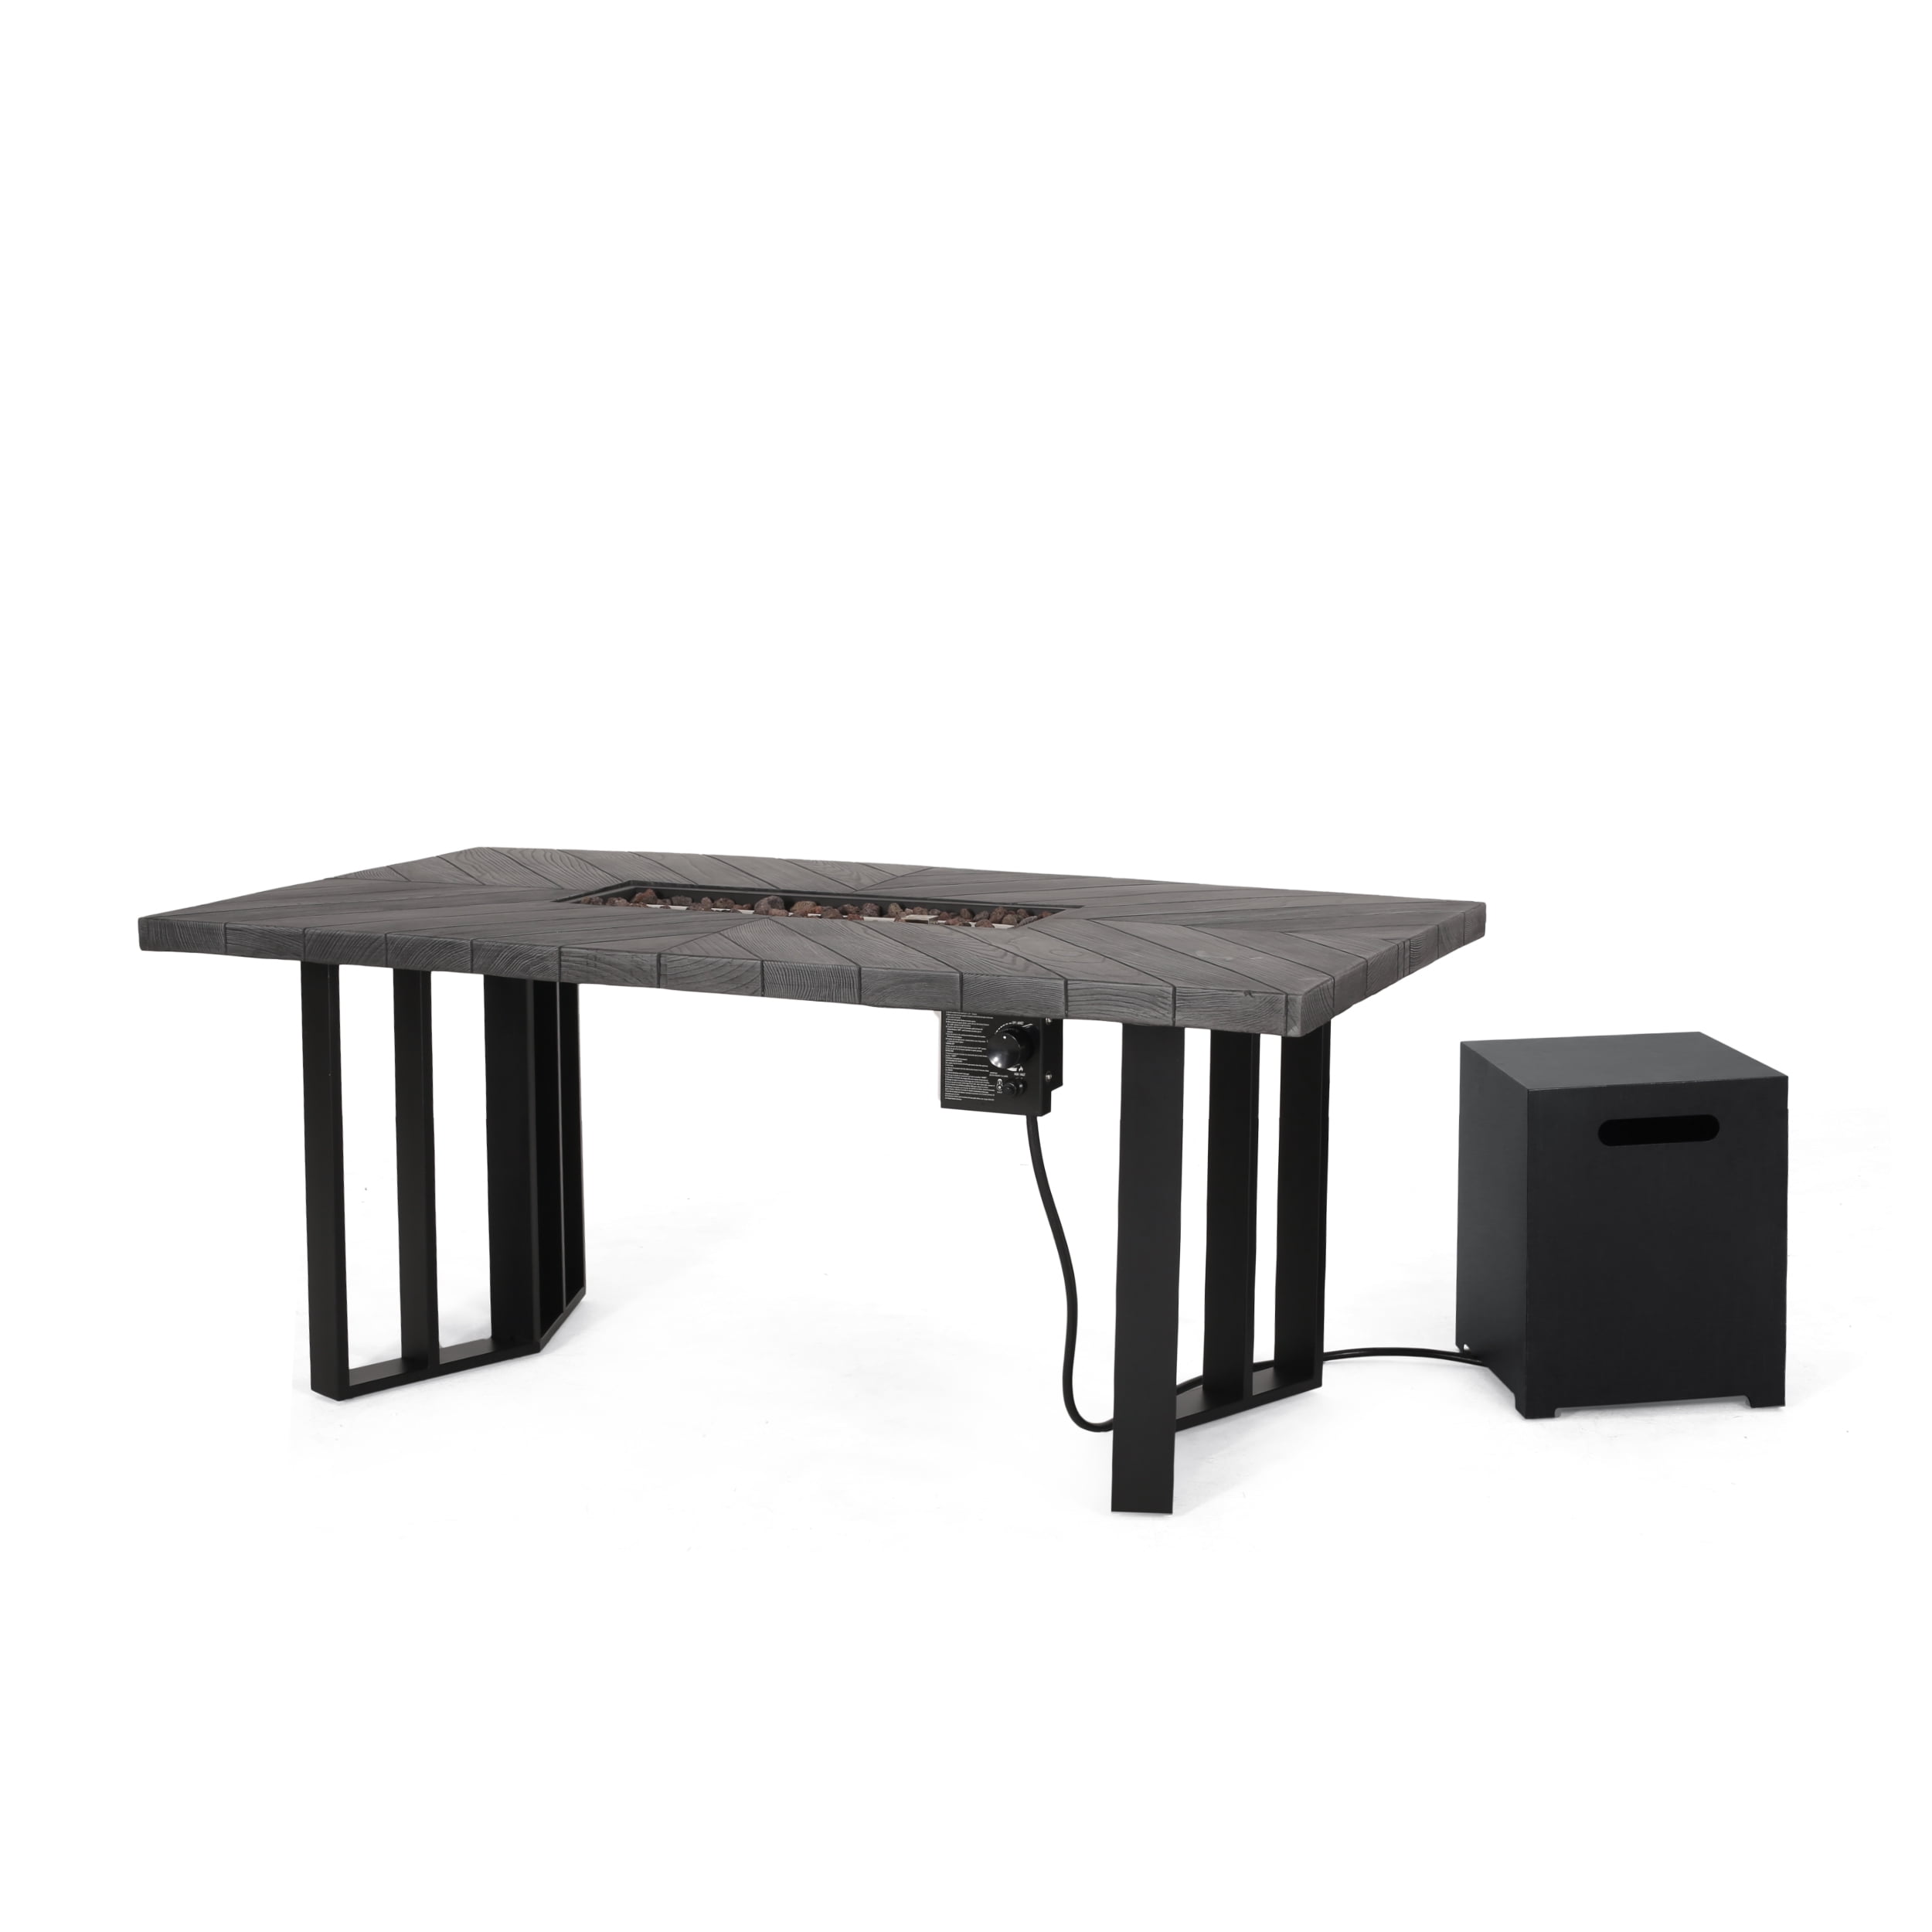 EXPRESS DELIVERY Genuine Sicily Black Glass Metal Folding Patio Table 